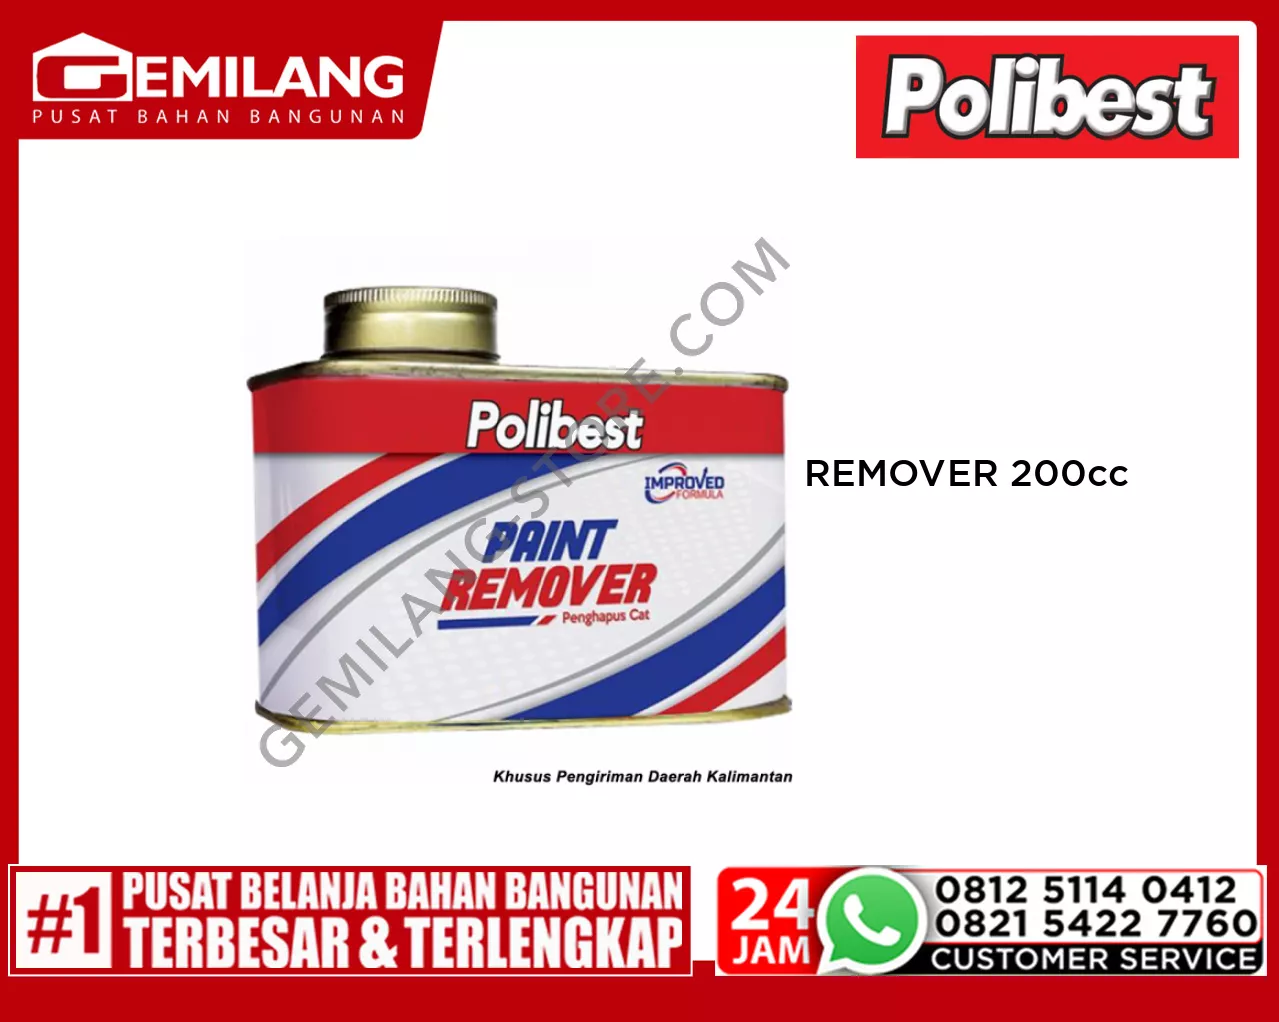 POLIBEST REMOVER 200cc